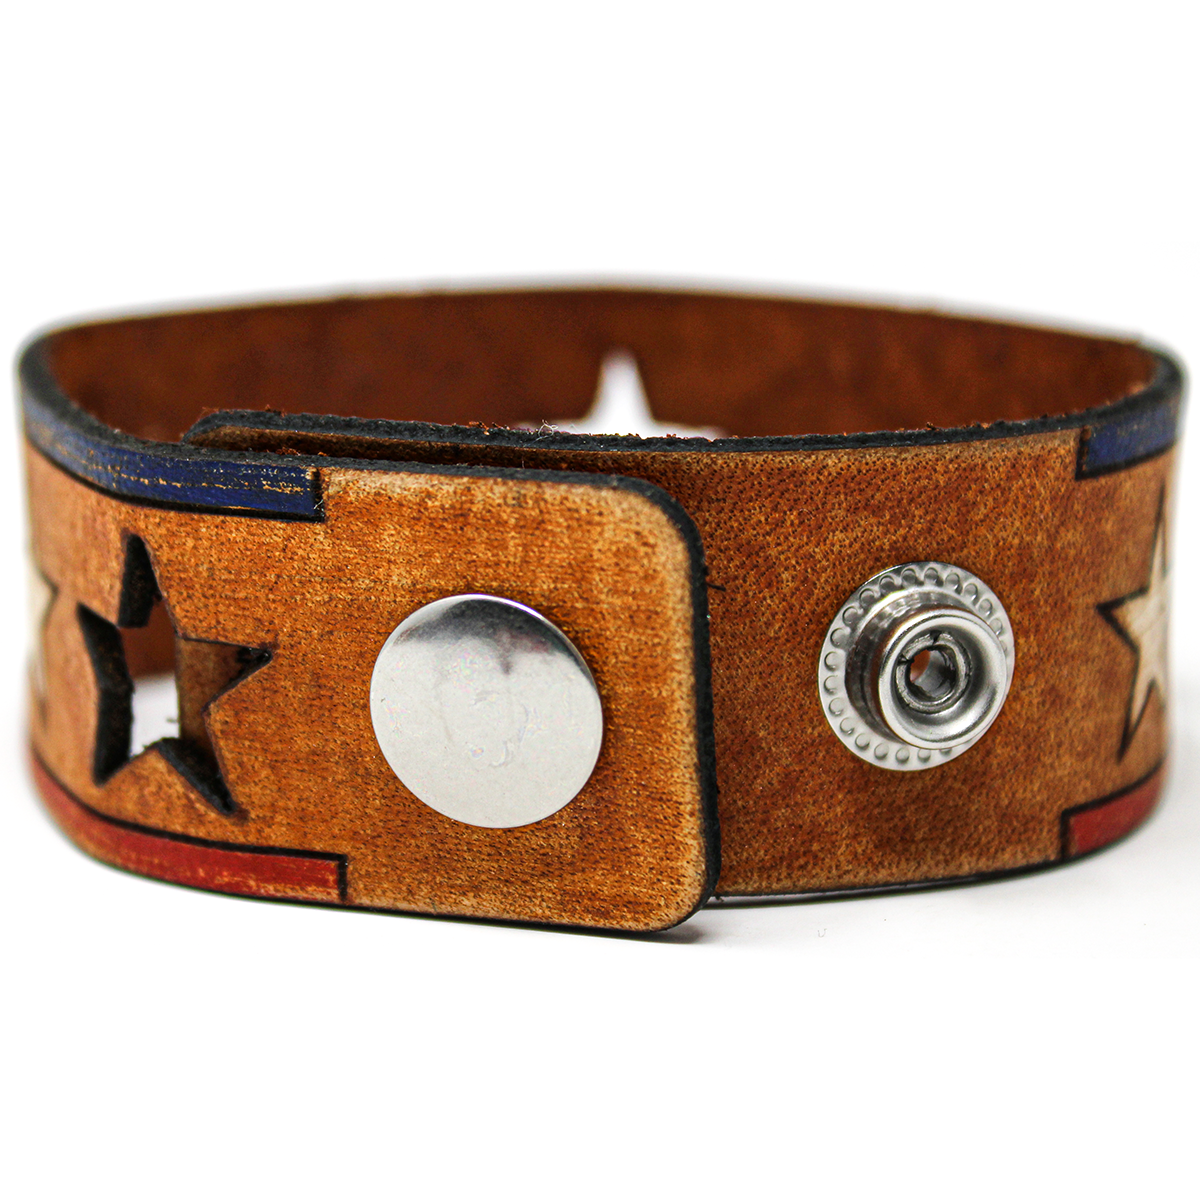 Women's Leather Bracelet - Stars and Bars Repeat